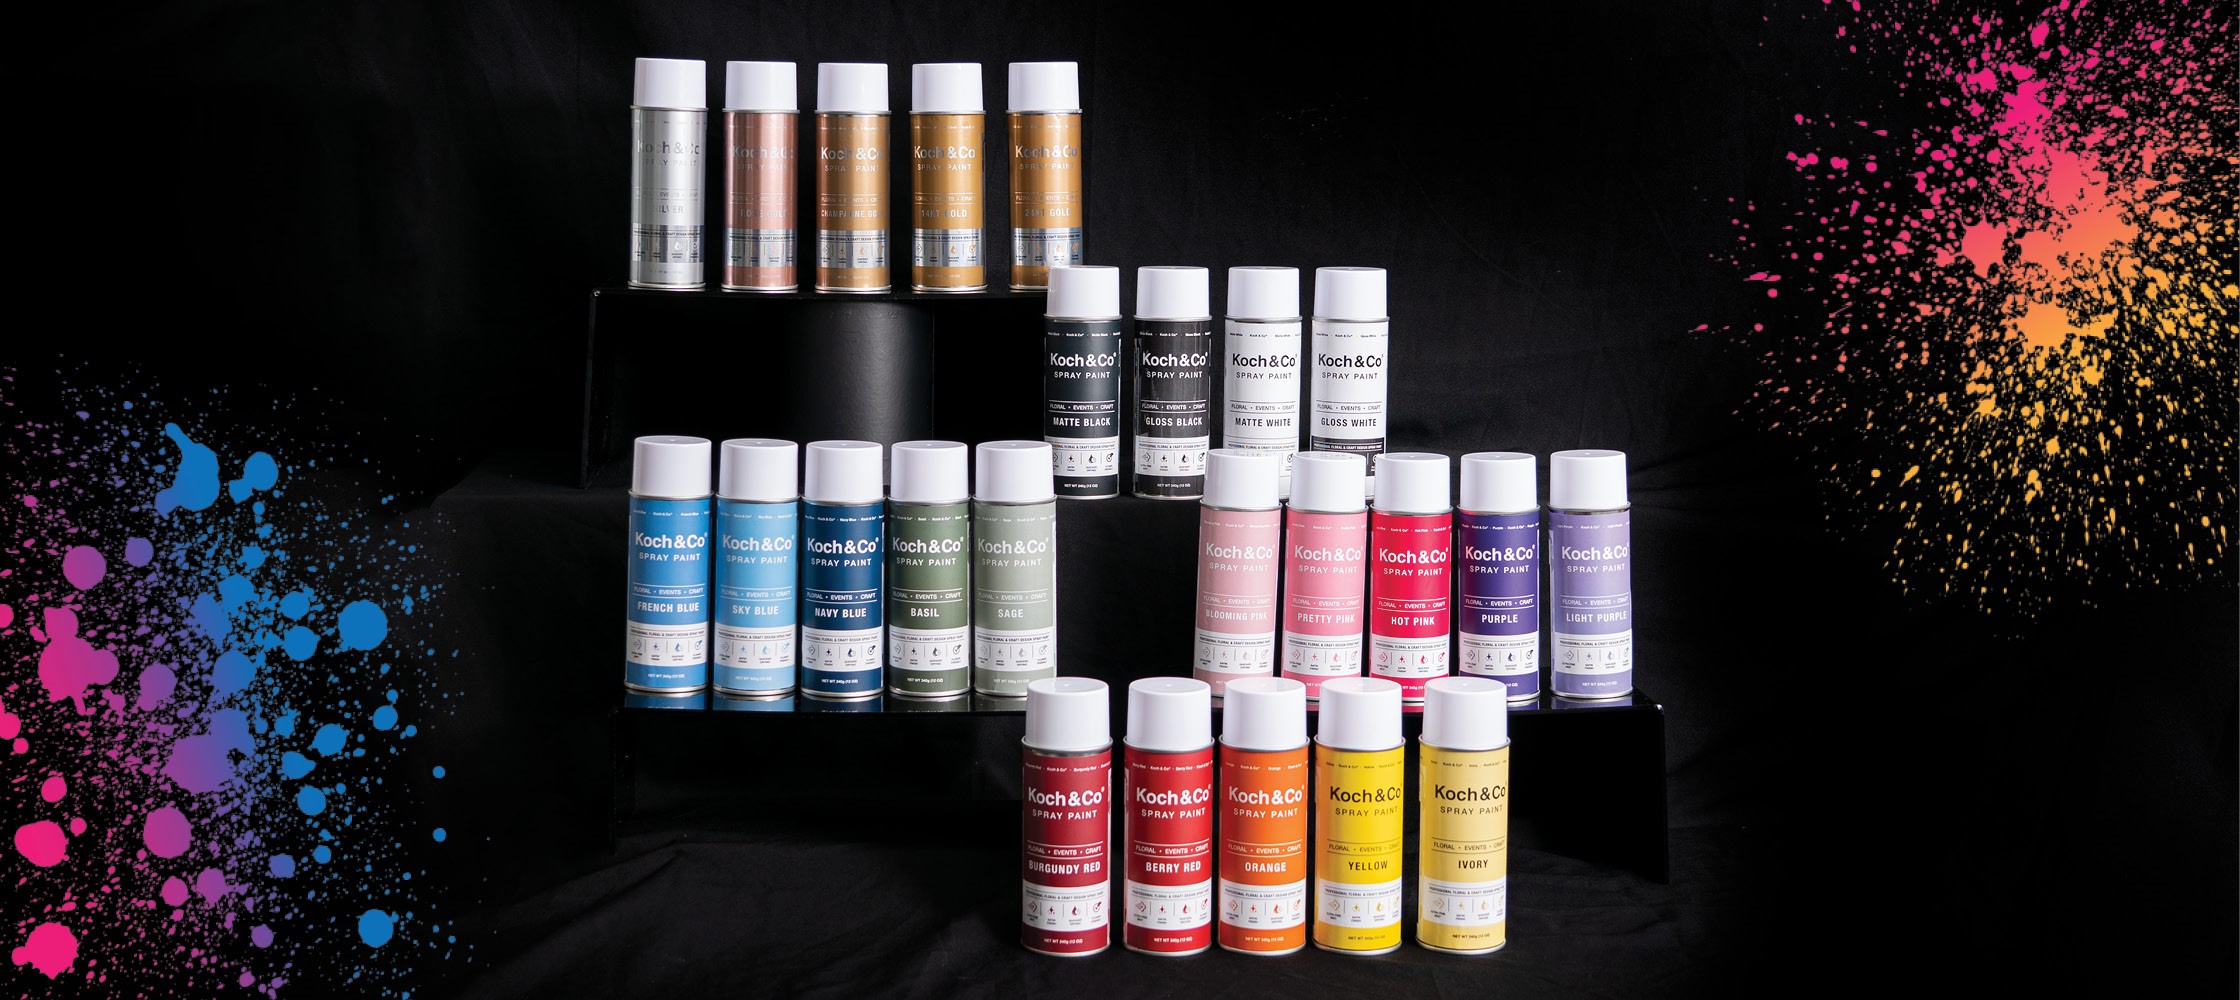 Introducing our NEW Koch & Co Professional Floral & Craft Design Spray Paint Range!